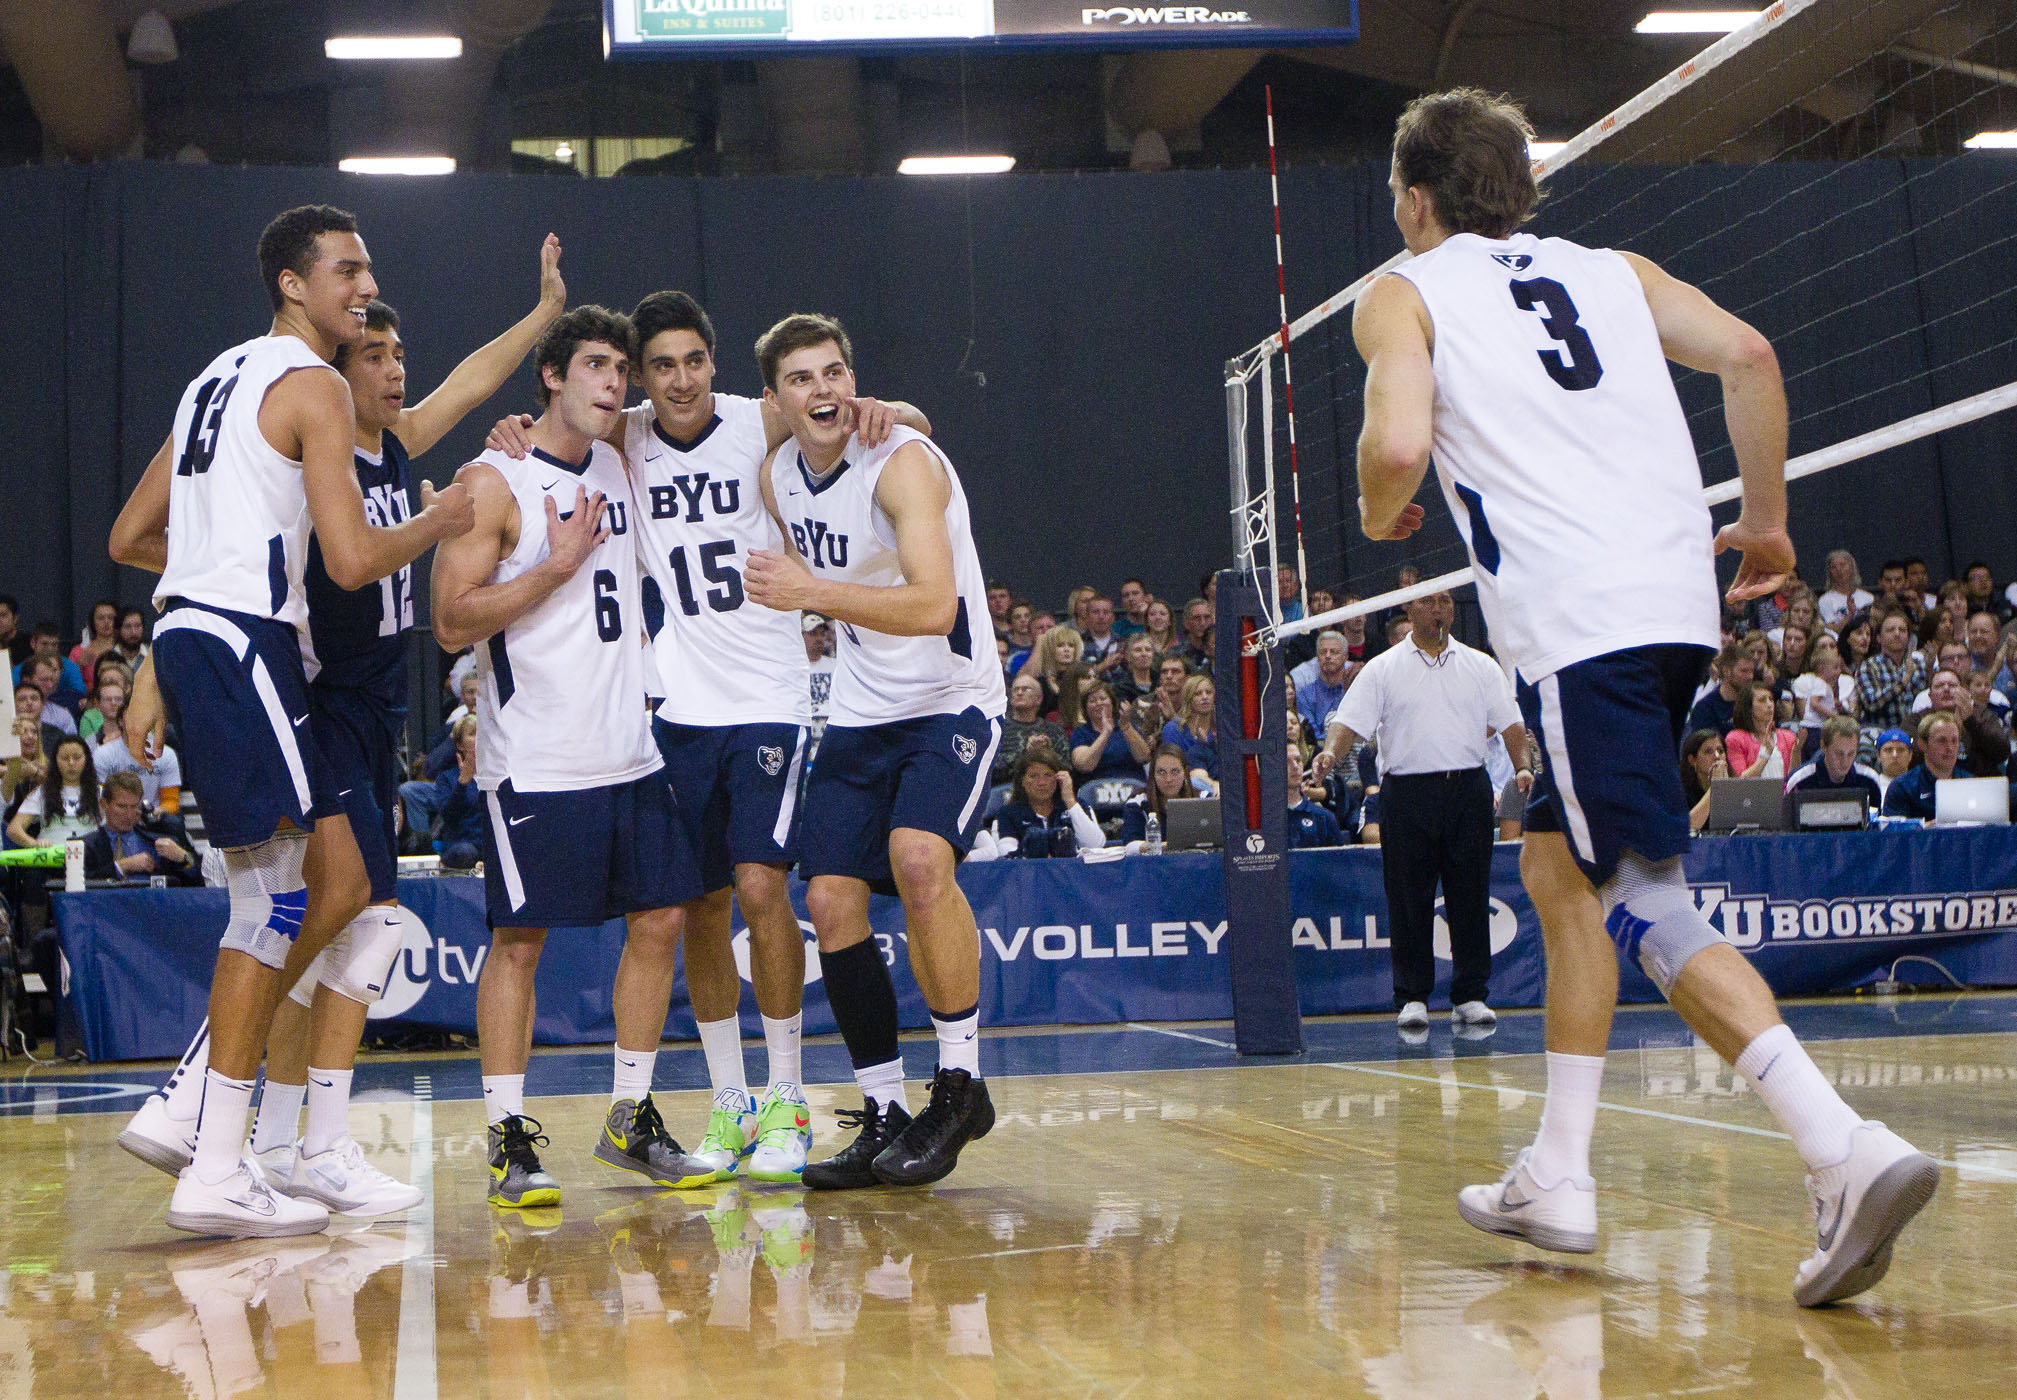 BYU men's volleyball takes down No. 1 Irvine, No. 13 San Diego The